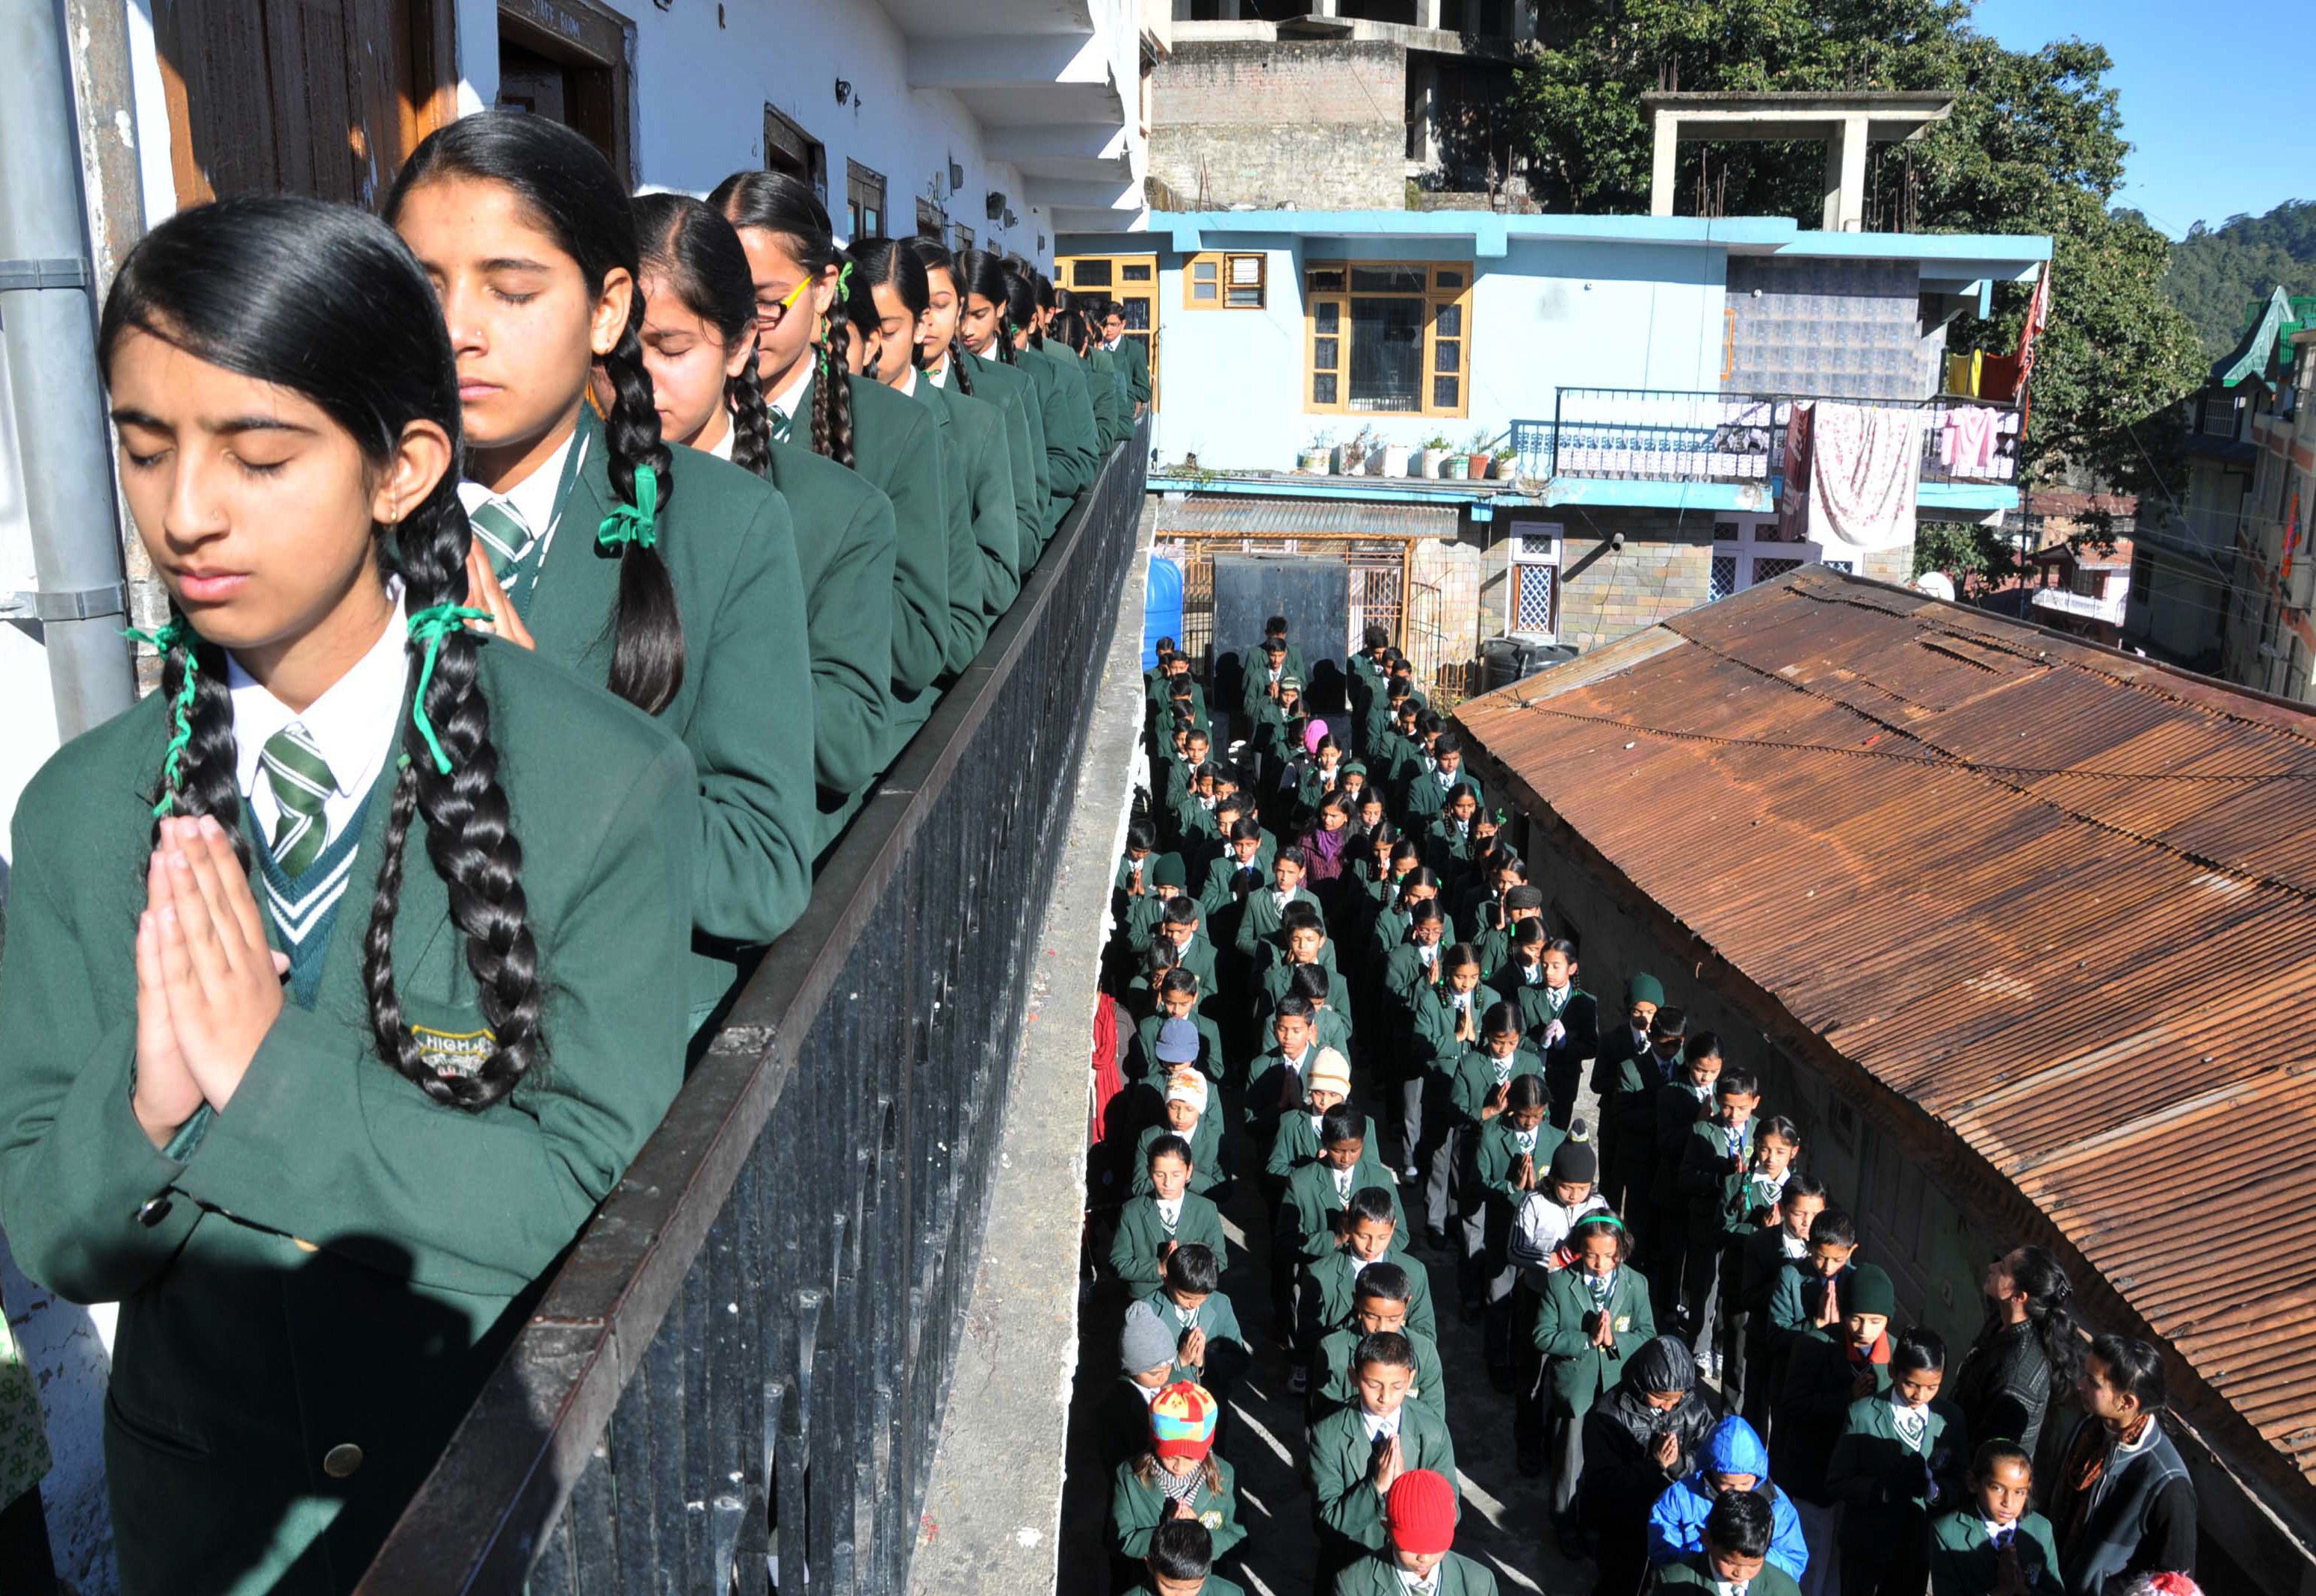 Schoolchildren pray during morning assembly at their school in Shimla, India, on Dec. 17, 2014, as they pay tribute to slain students and staff after an attack on an army school in Peshawar, Pakistan (STRDEL—AFP/Getty Images)